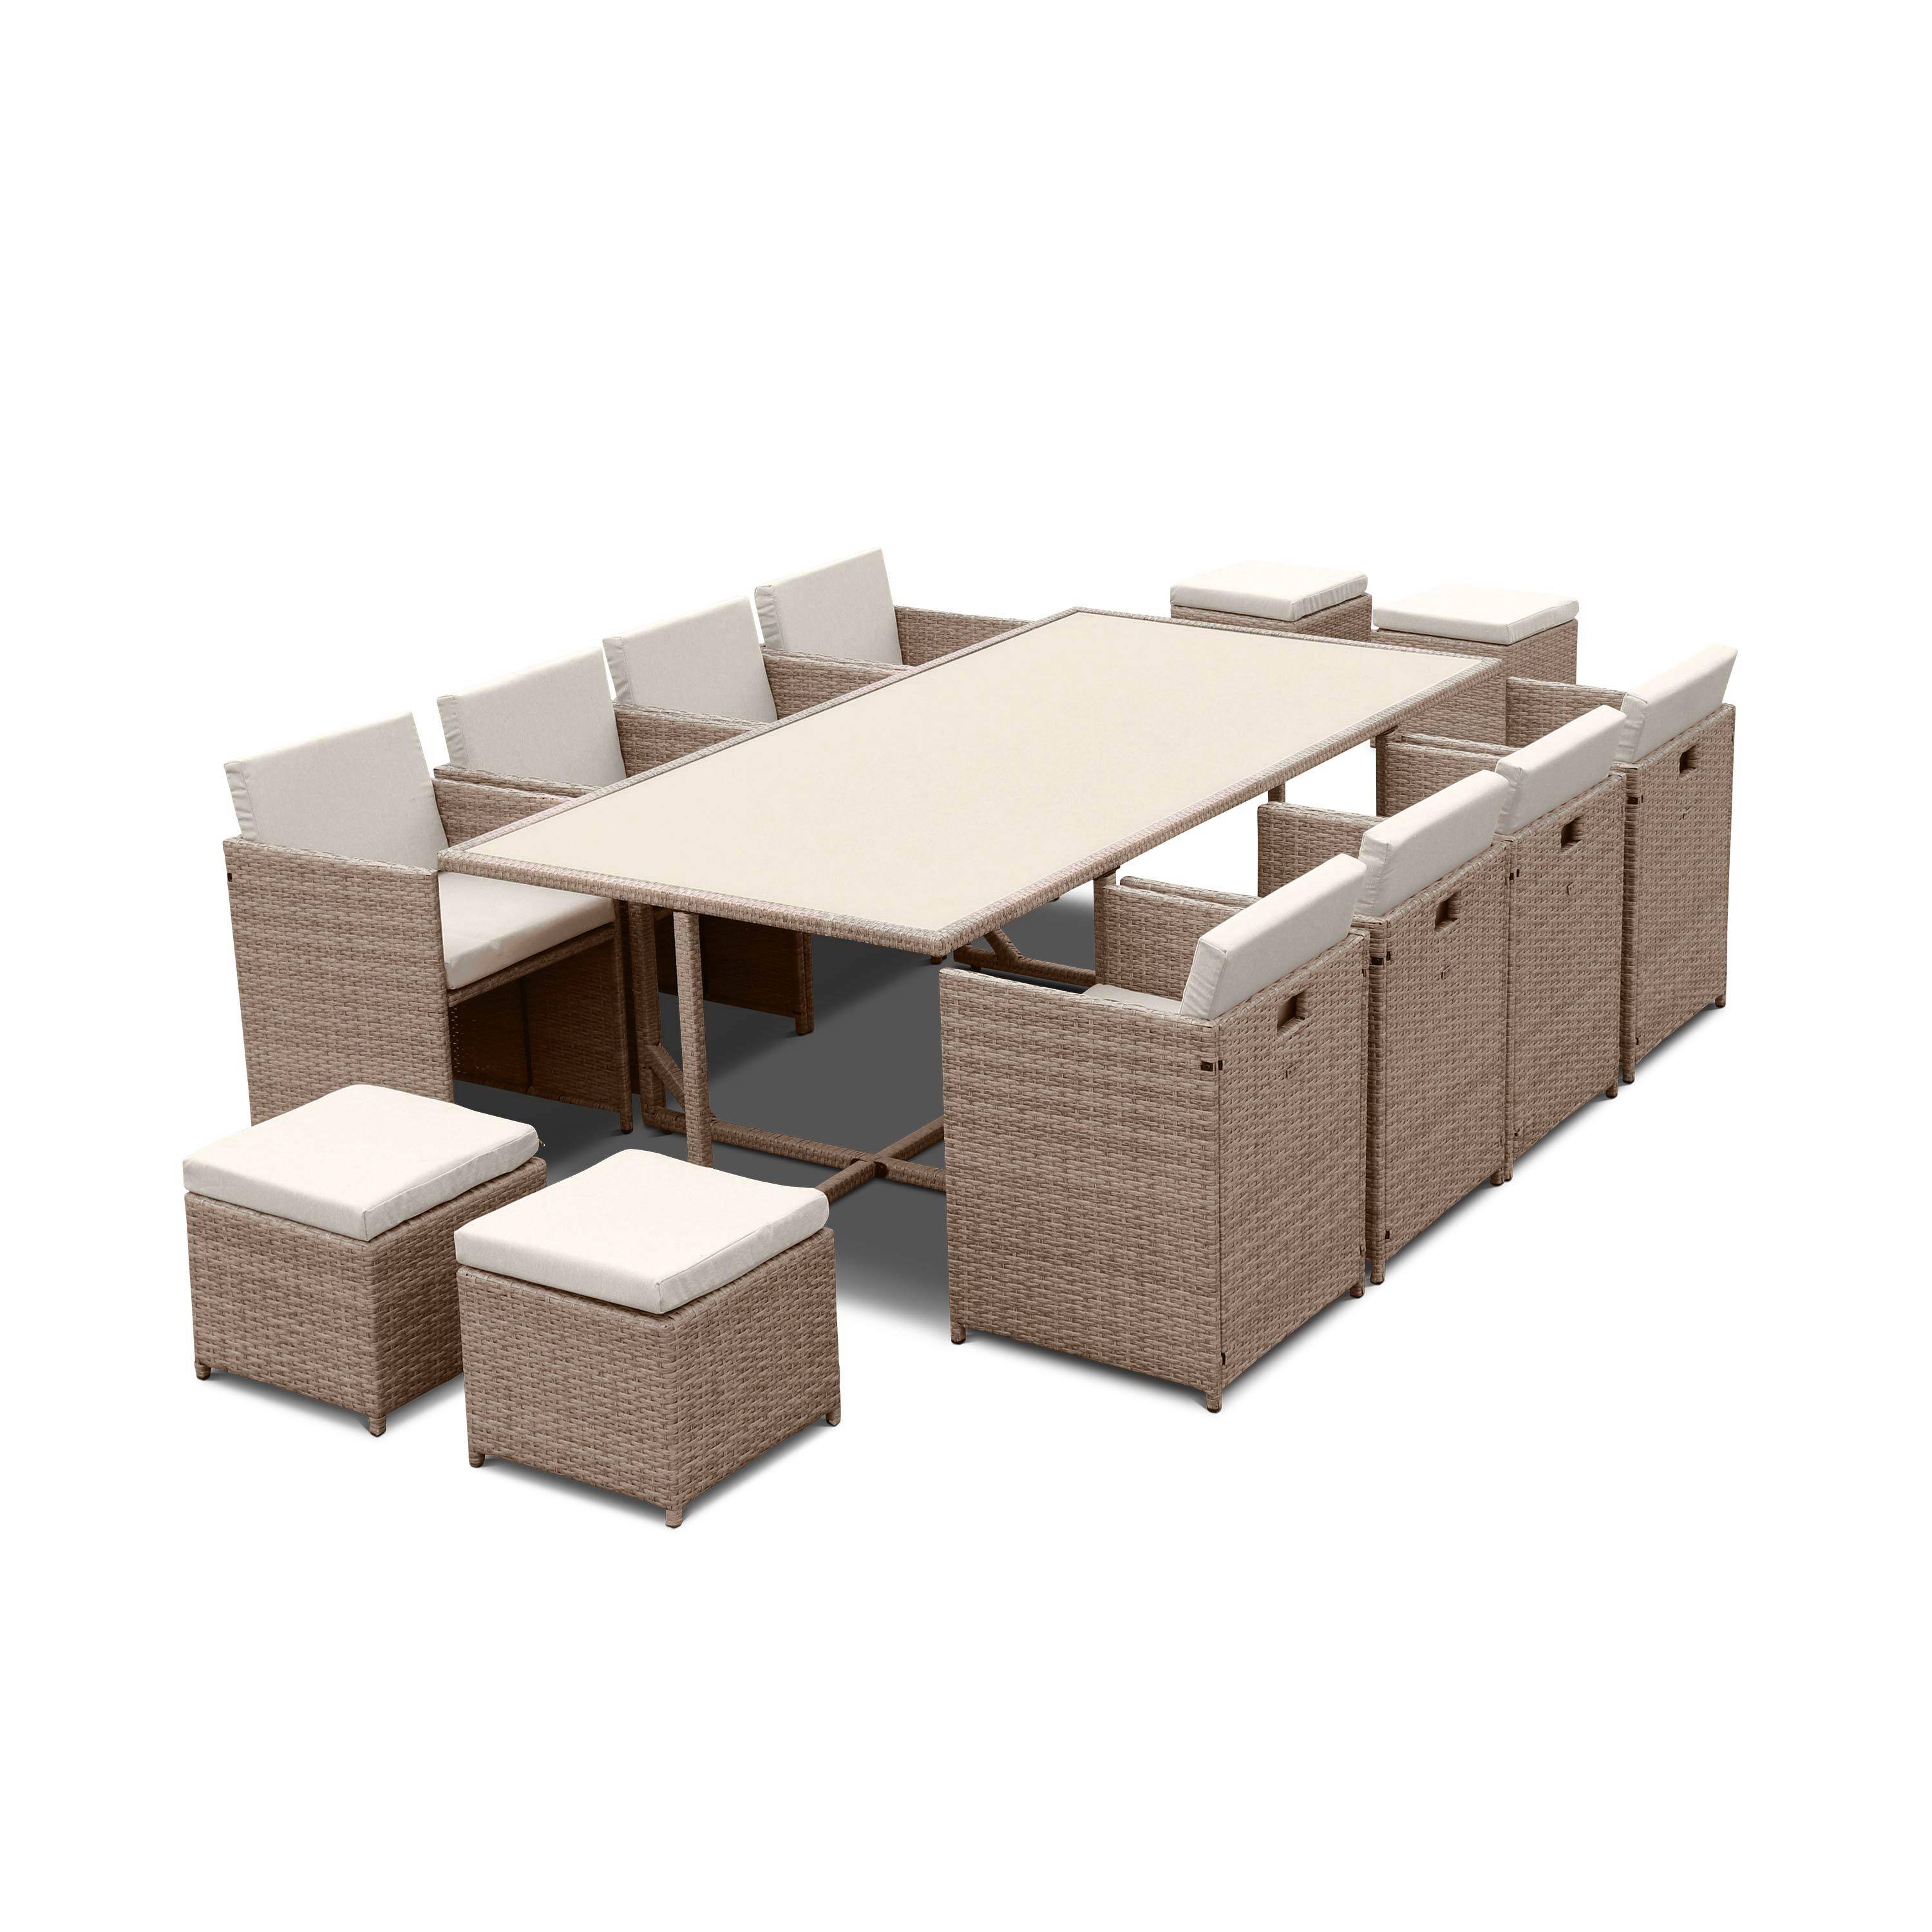 8 to 12-seater rattan cube table set - table, 8 armchairs, 4 footstools - Vabo 12 - Natural rattan, Beige cushions,sweeek,Photo2